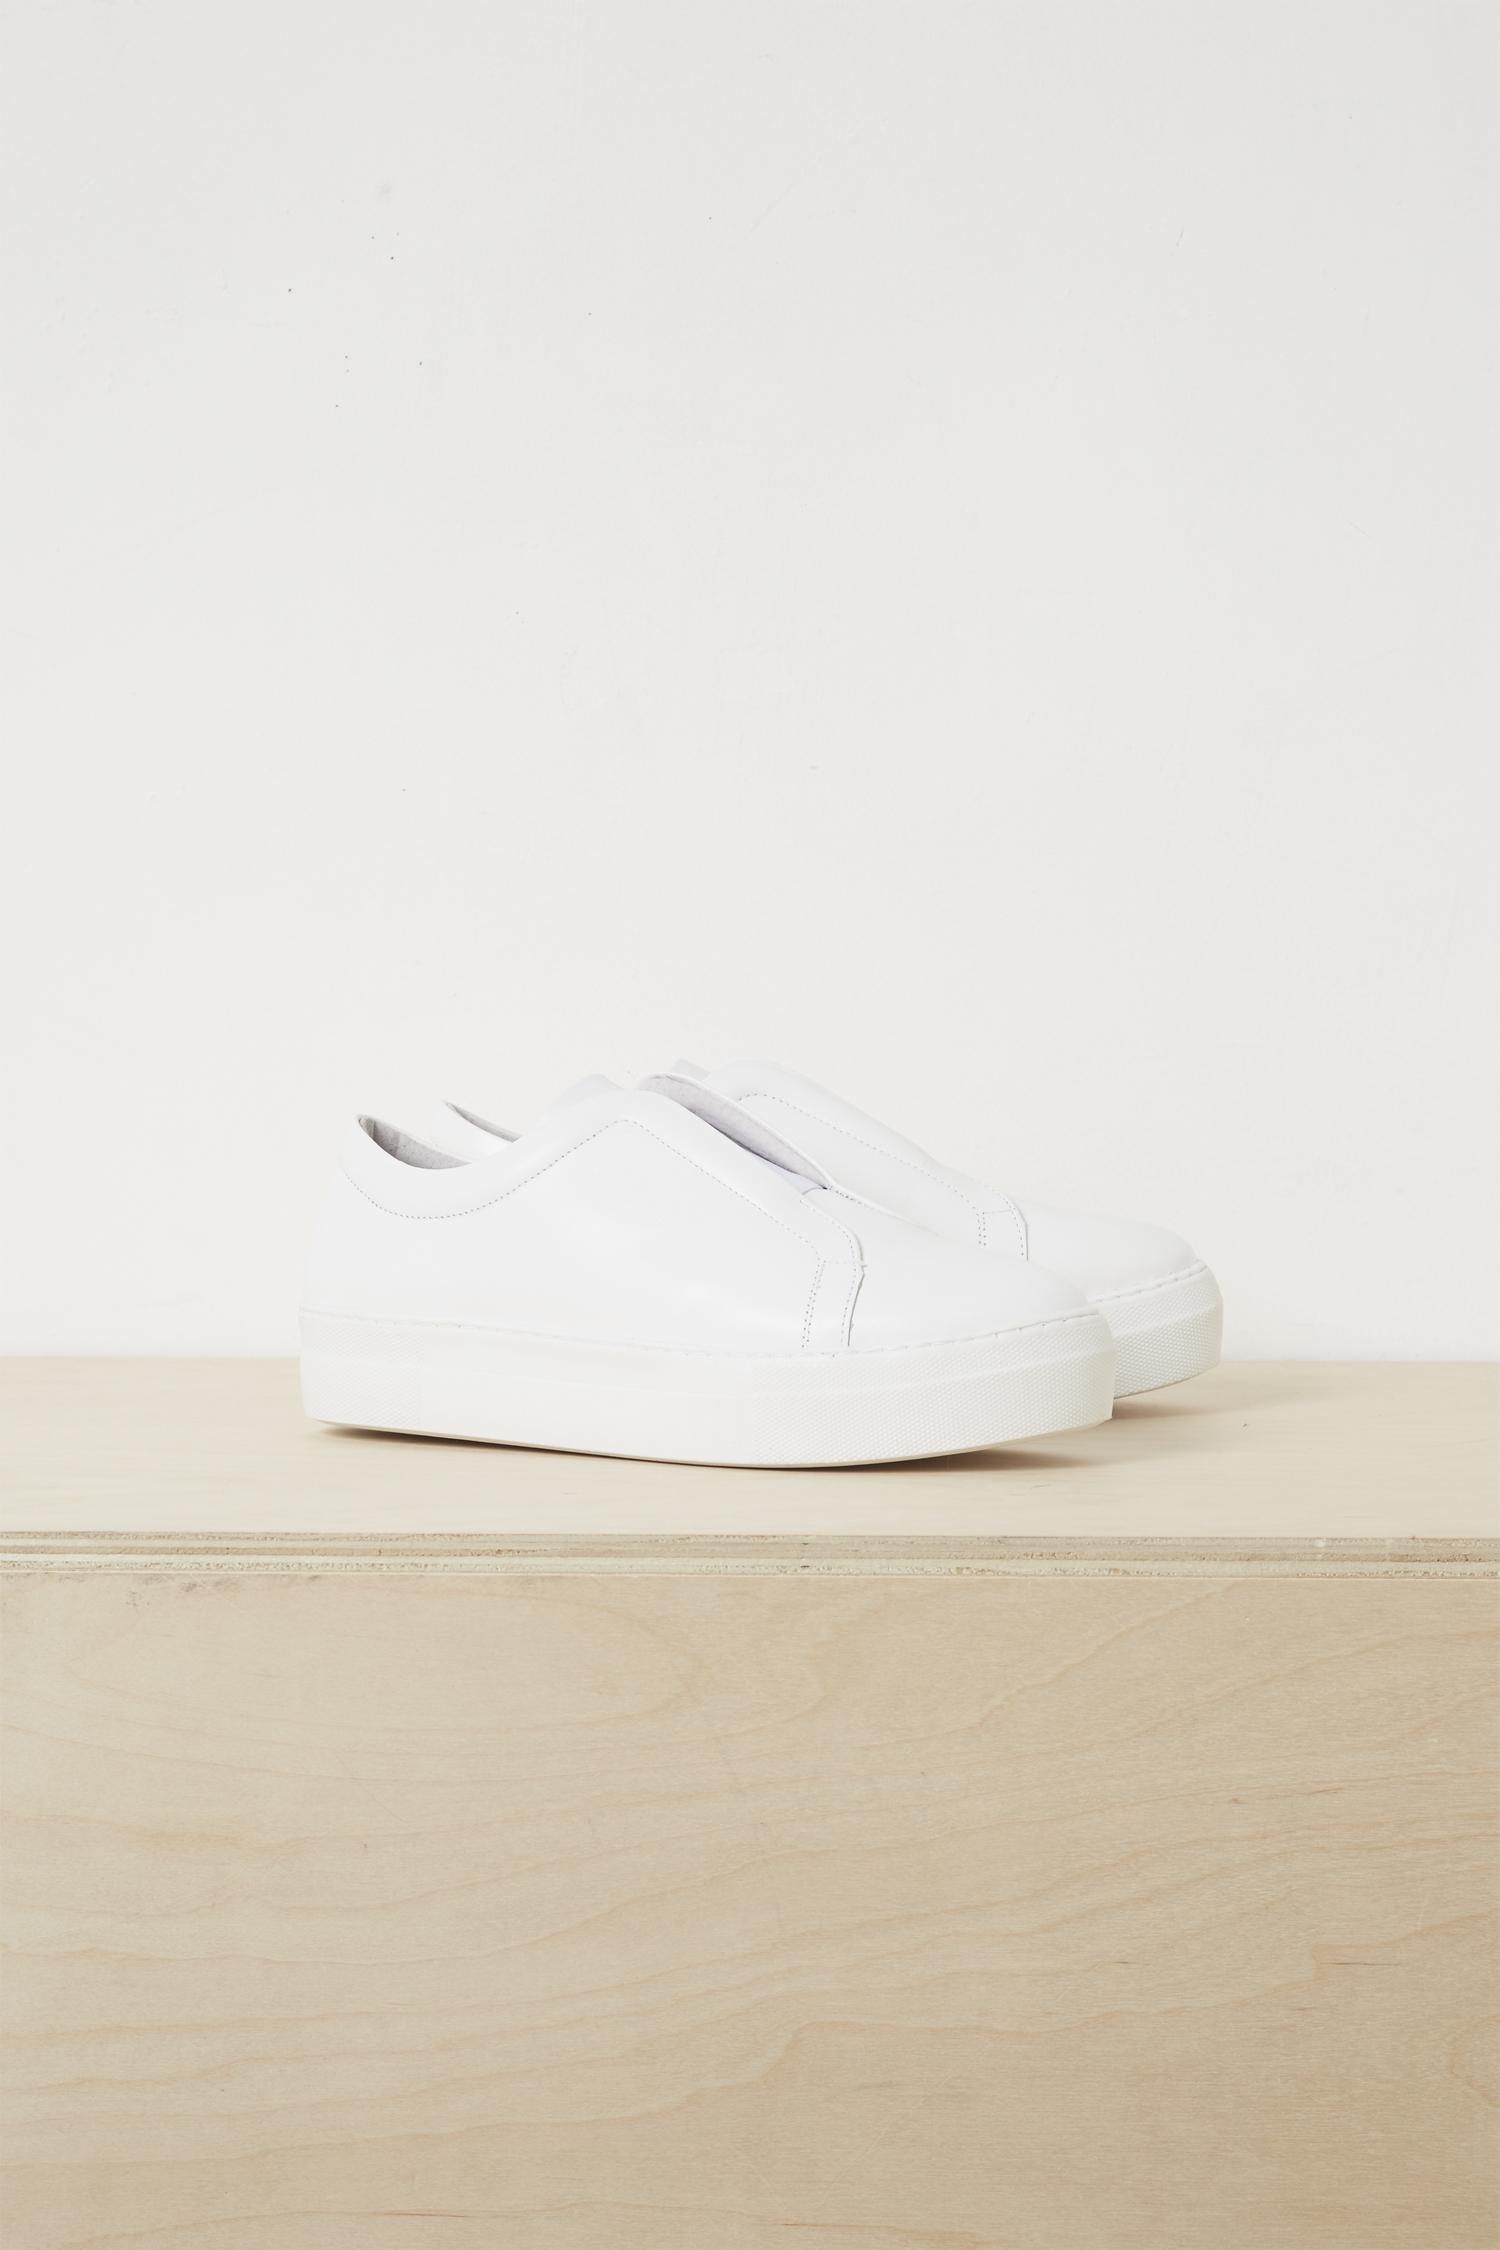 Lyst - French Connection Sara Elastic Slip On Trainers in White